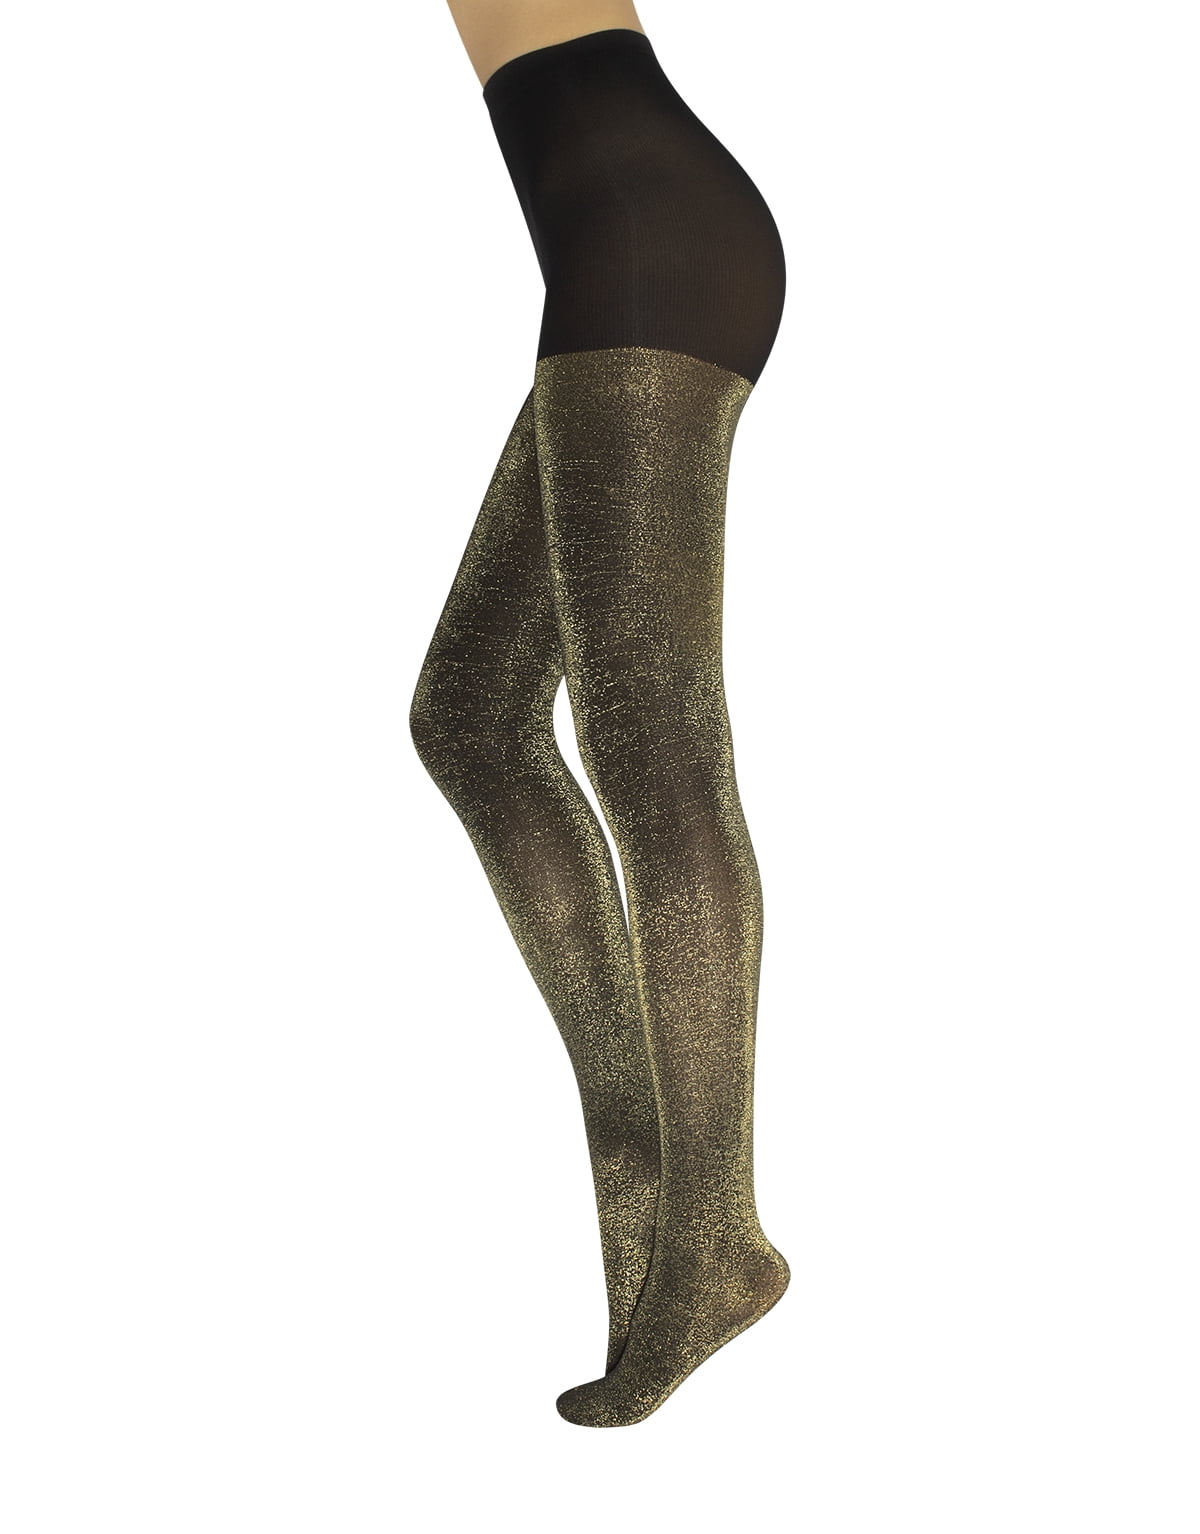 CALZITALY - Opaque Lurex Sparky Tights – Gold and Silver Glitter Pantyhose  for Women – 60 DEN (Size: S/M, Color: Black/Silver)